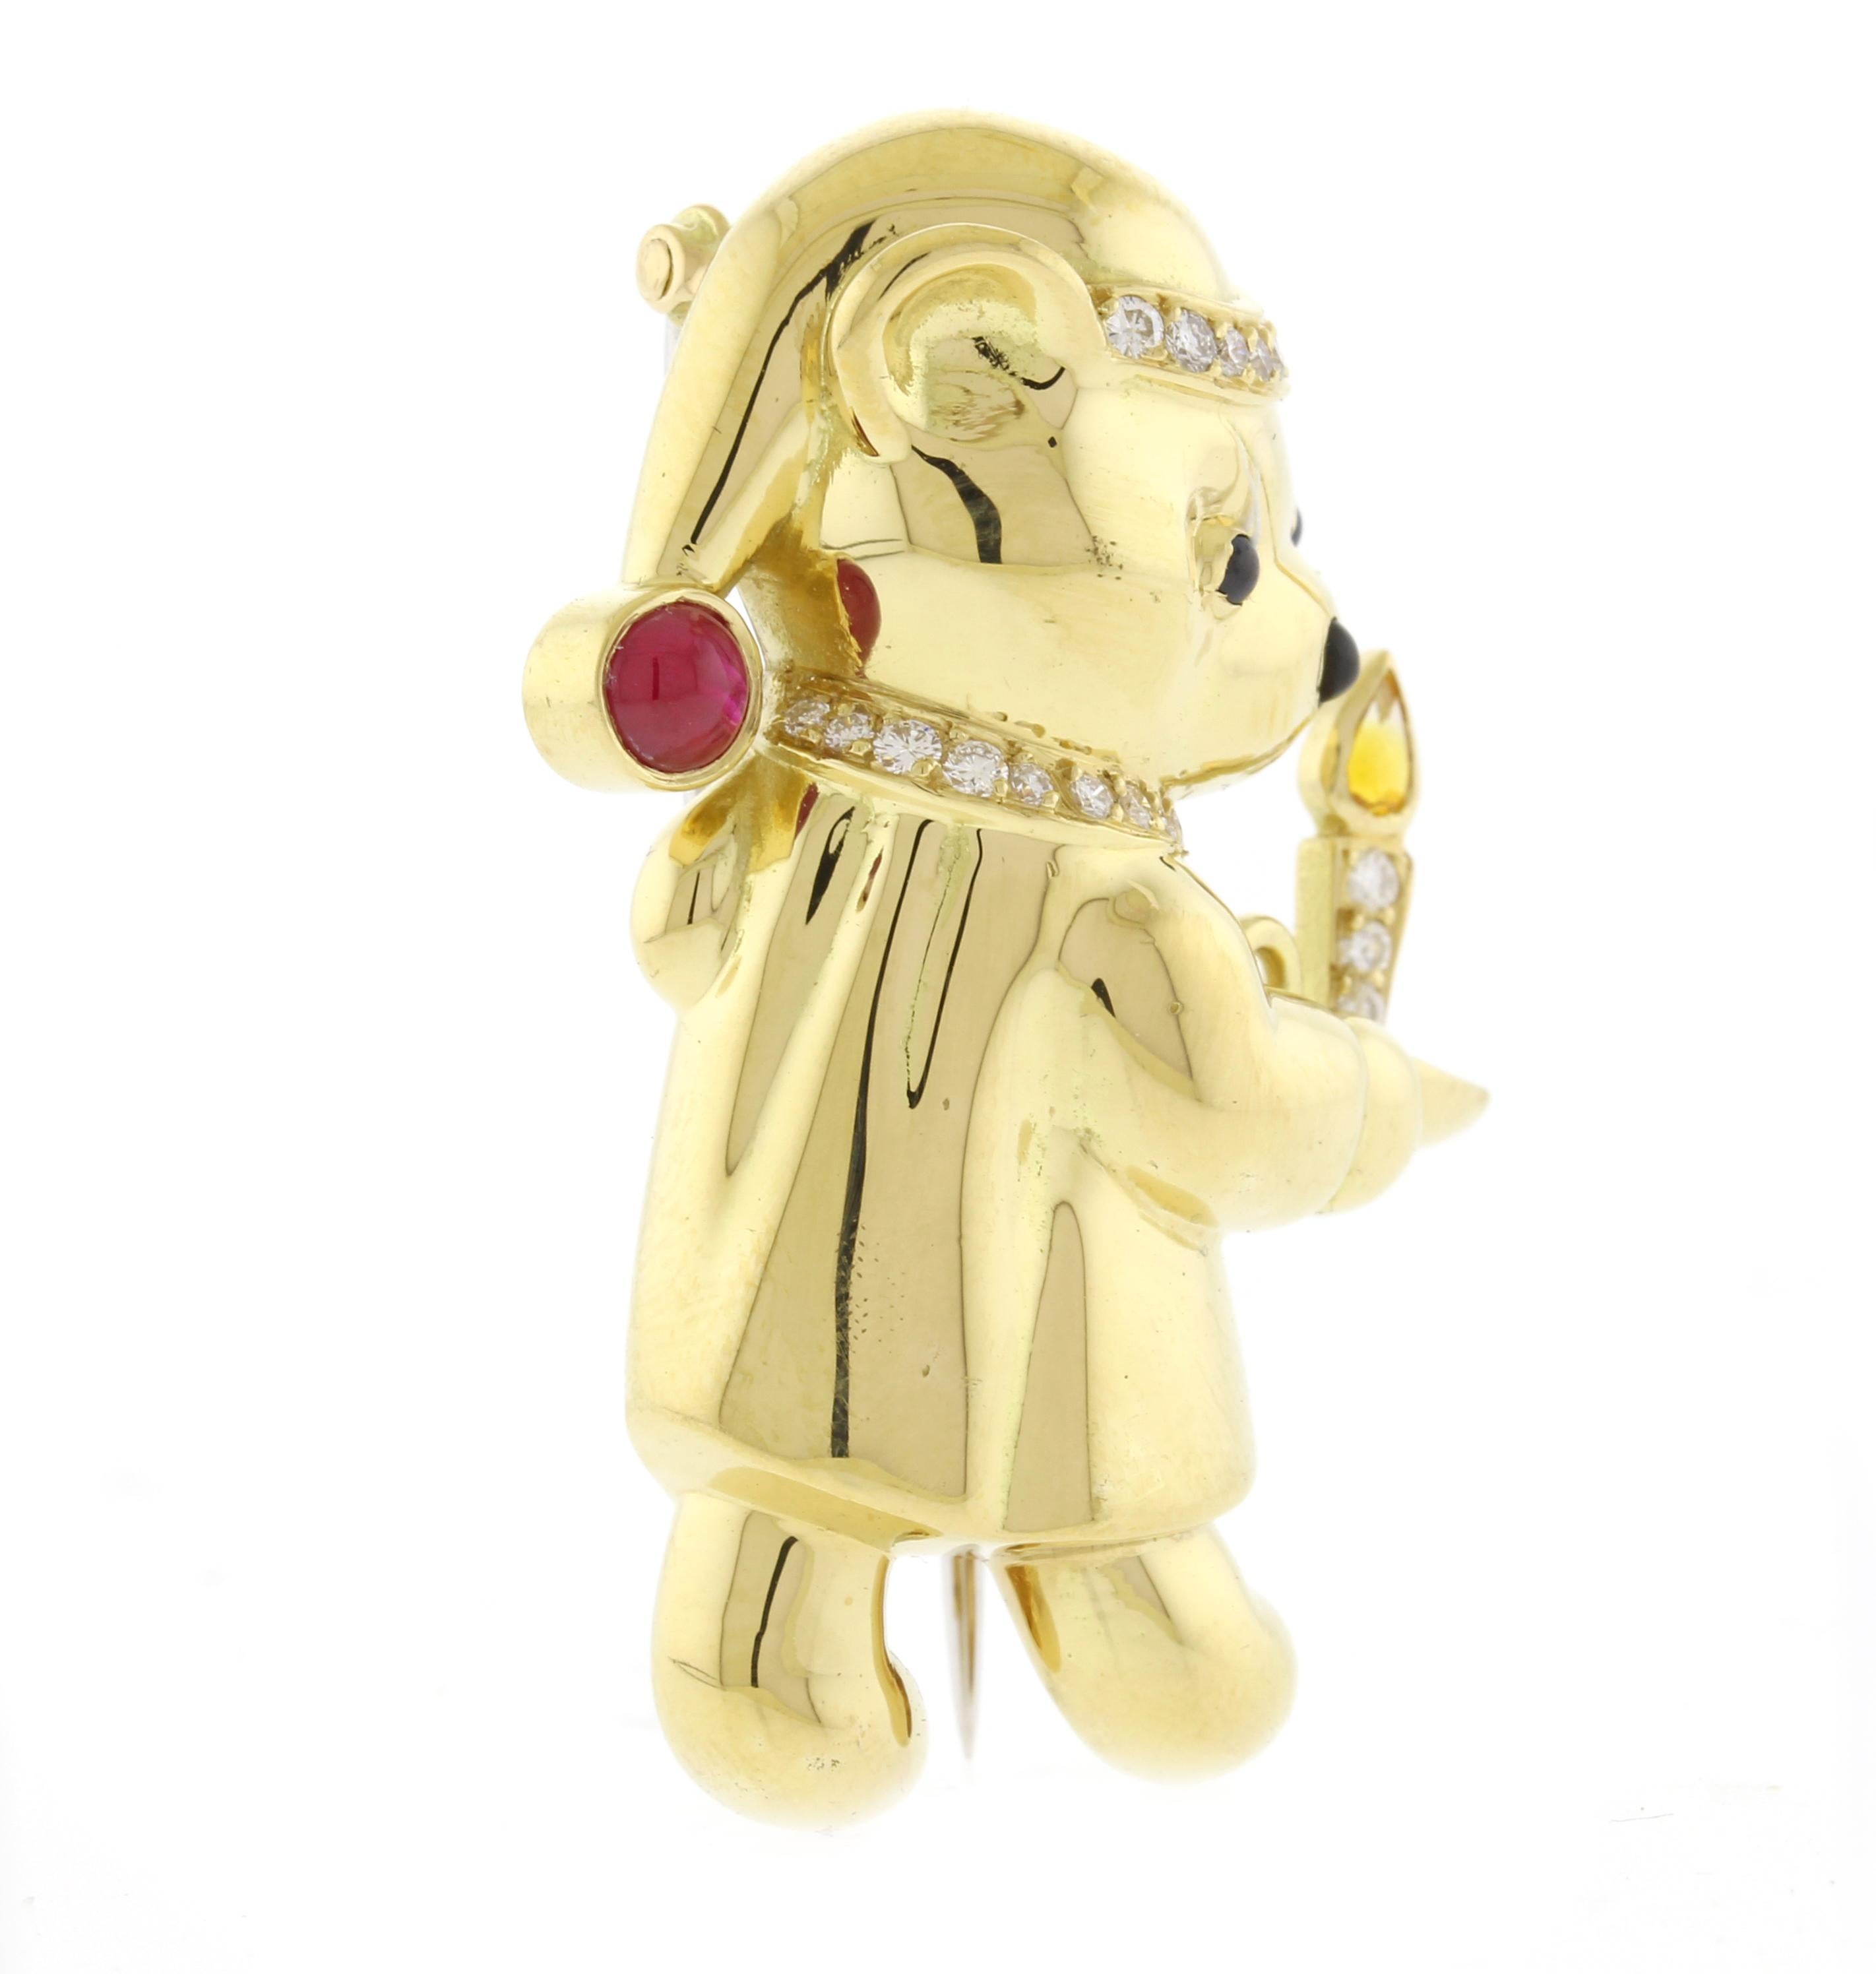 Brilliant Cut Jonathan Ralston's Exquisite Limited Edition Gold Bear Brooch For Sale